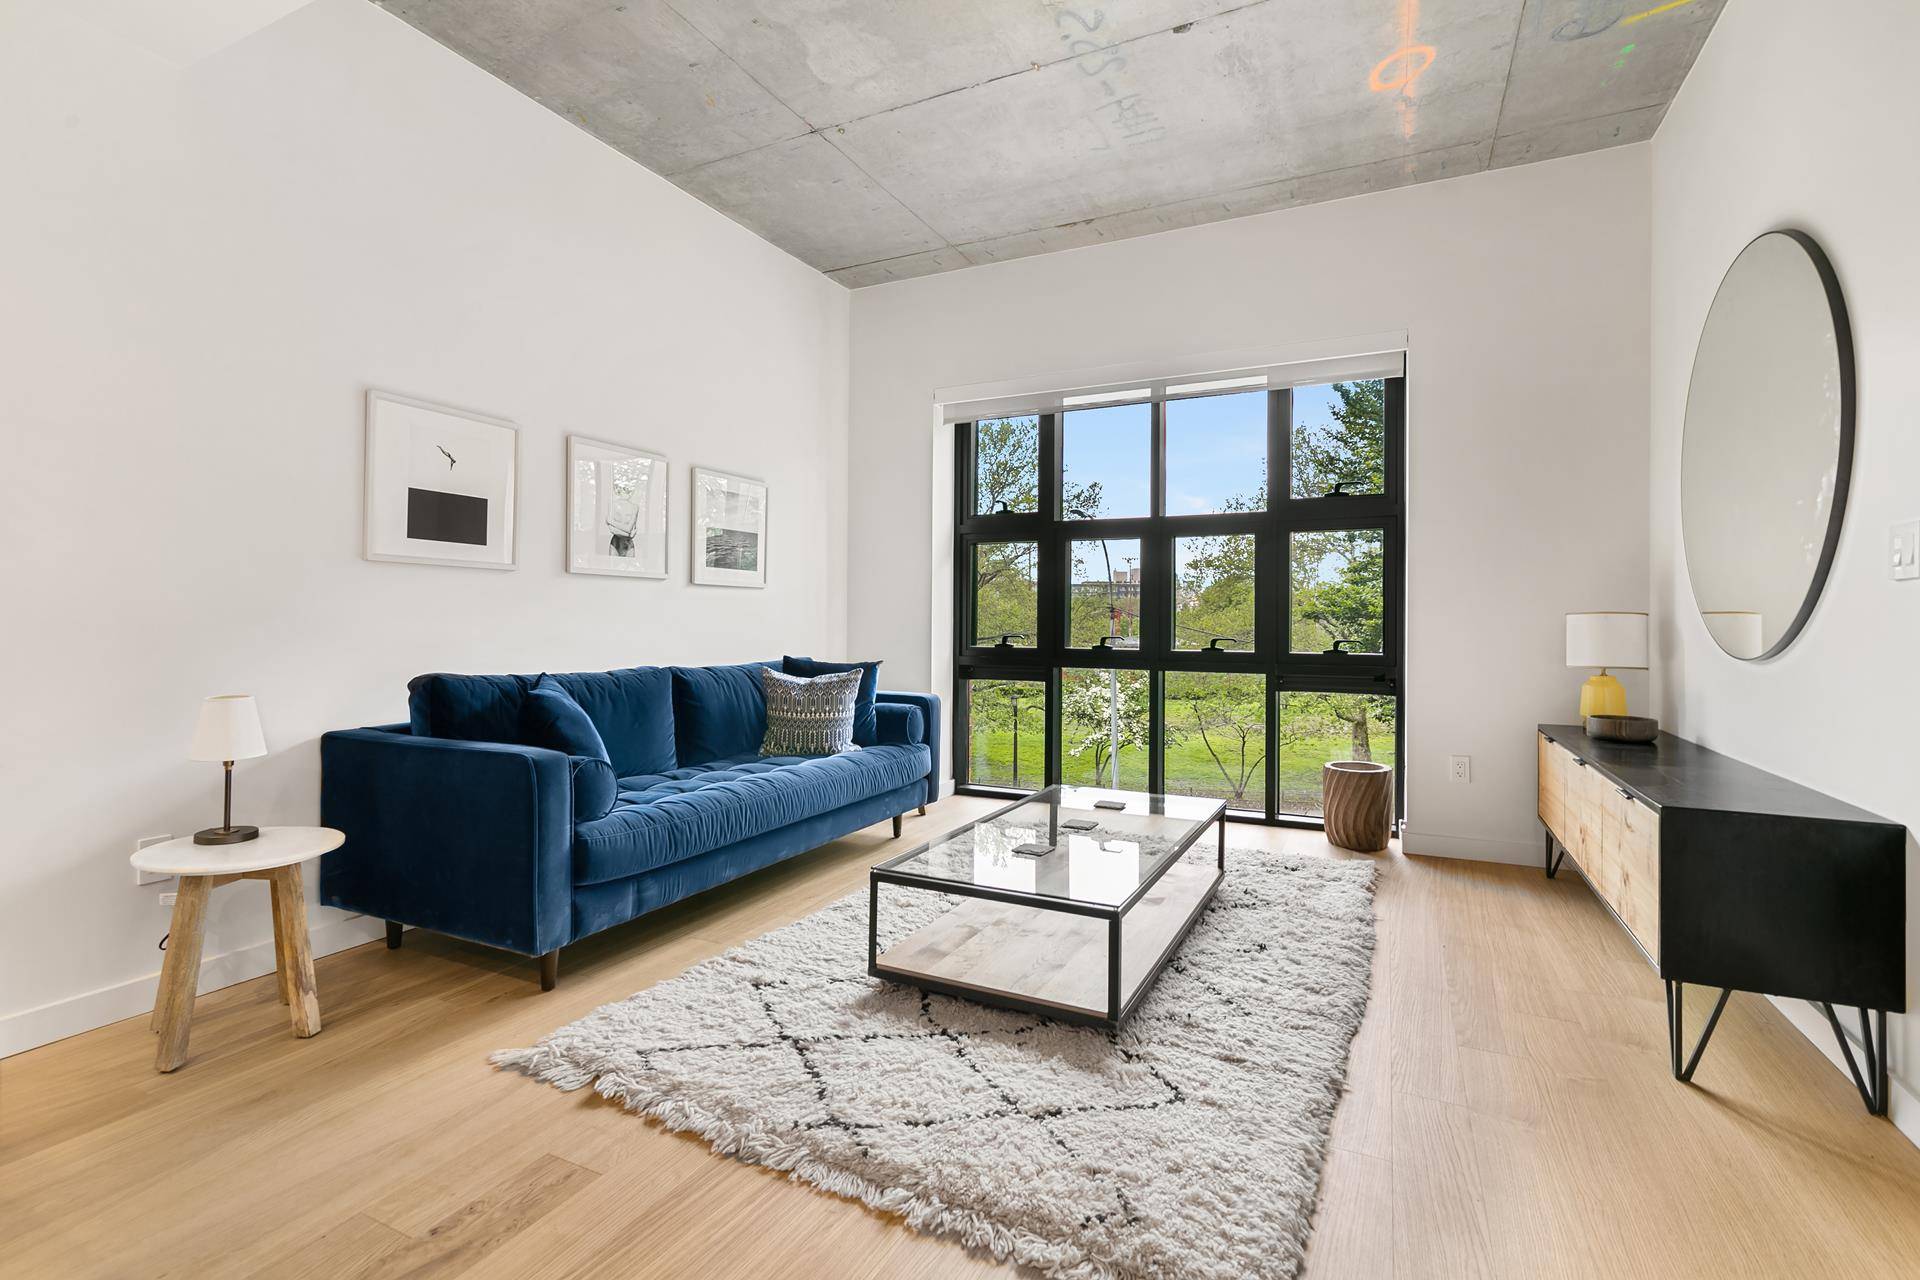 Located in one of Greenpoint's most sought after luxury rental buildings this pristine apt boasts stunning views of McCarren Park.